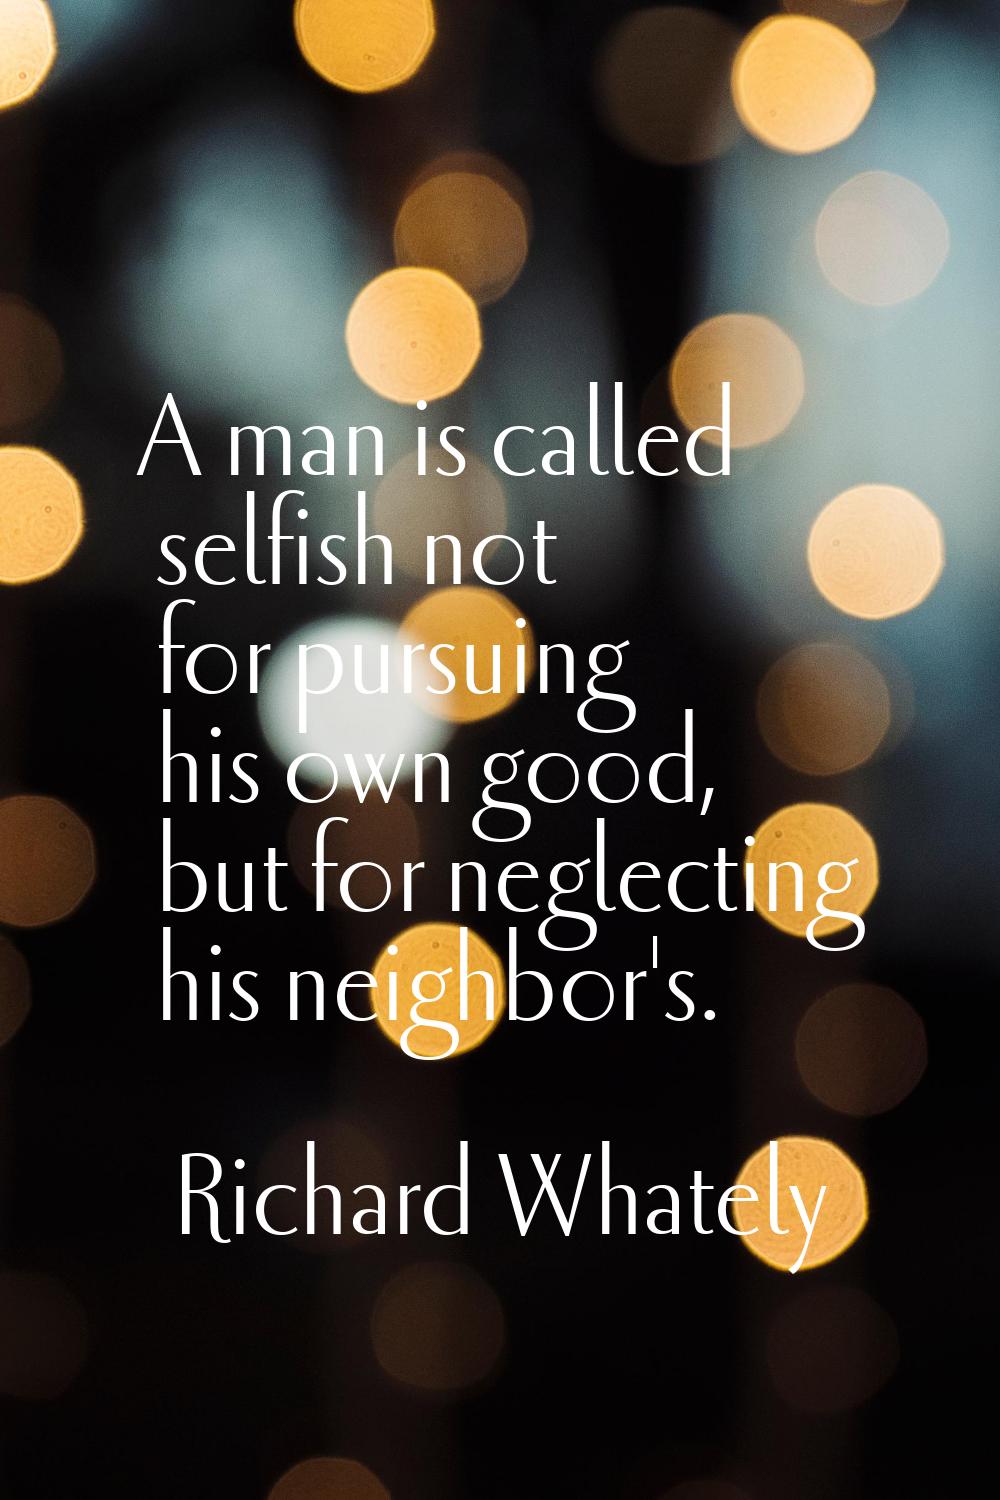 A man is called selfish not for pursuing his own good, but for neglecting his neighbor's.